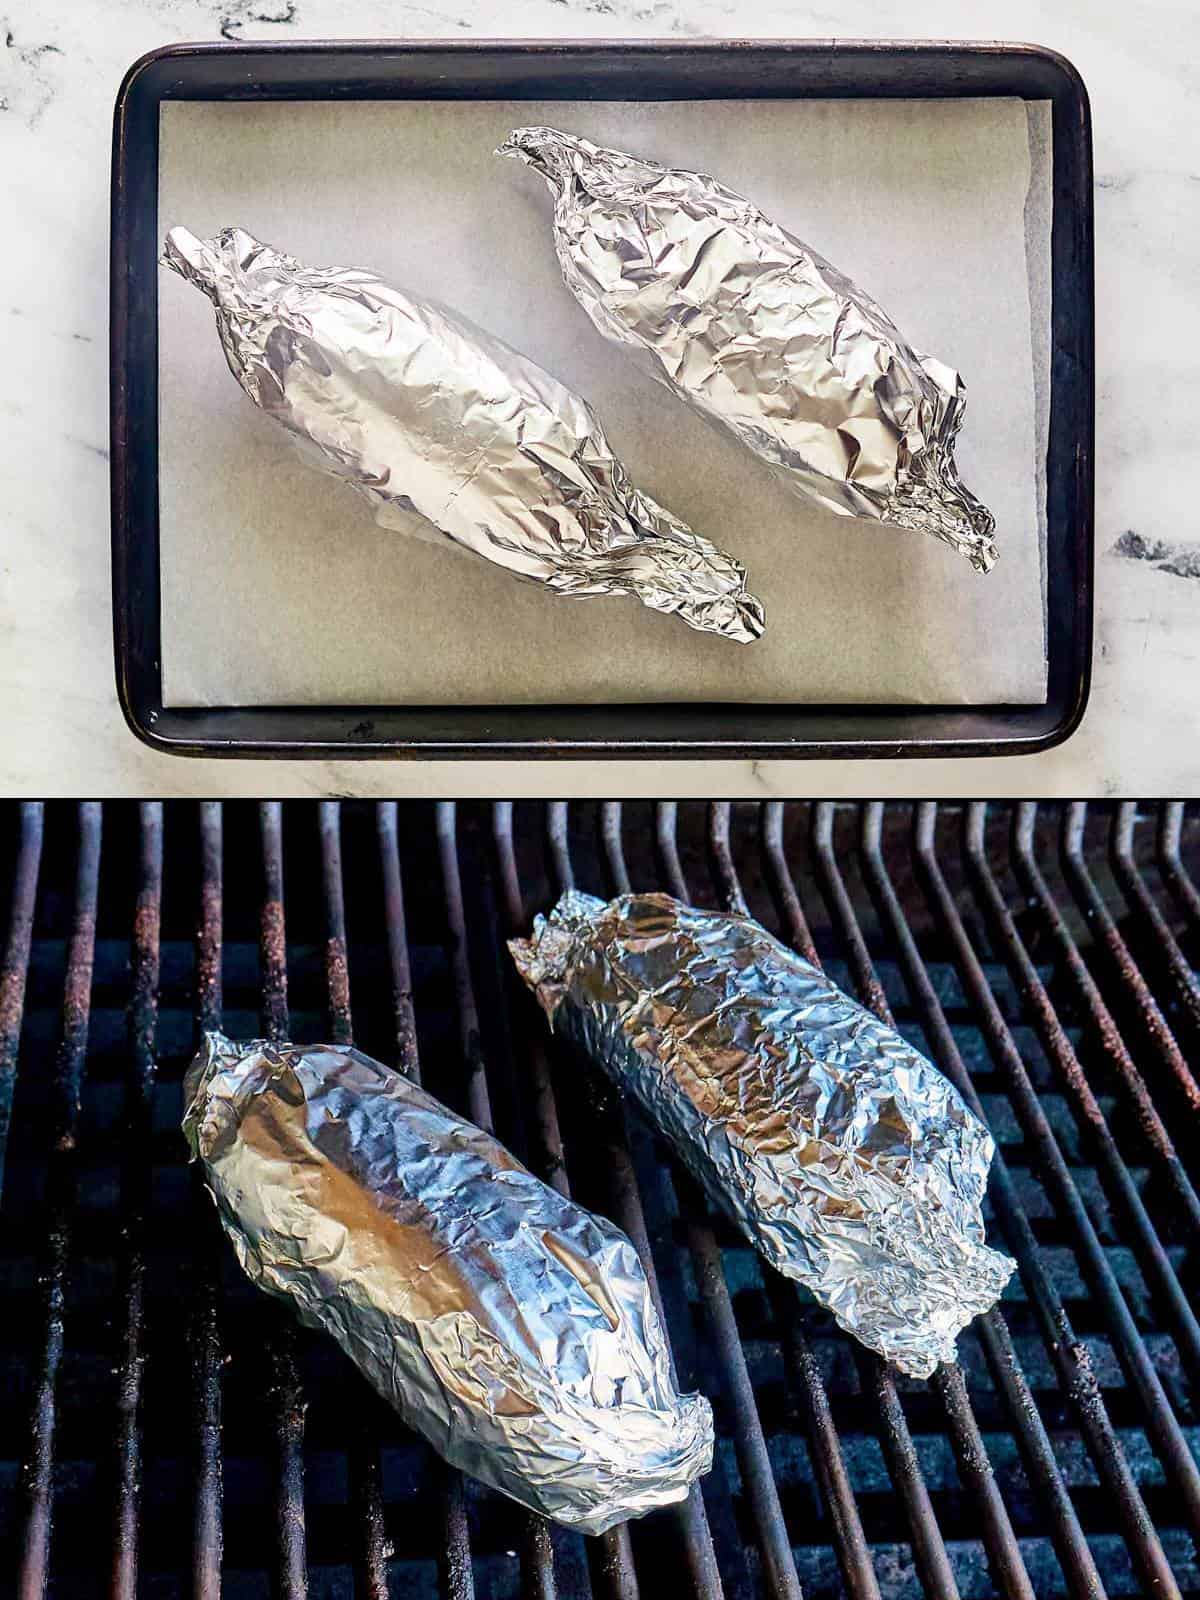 Potatoes wrapped in foil on a tray and on a grill grate.